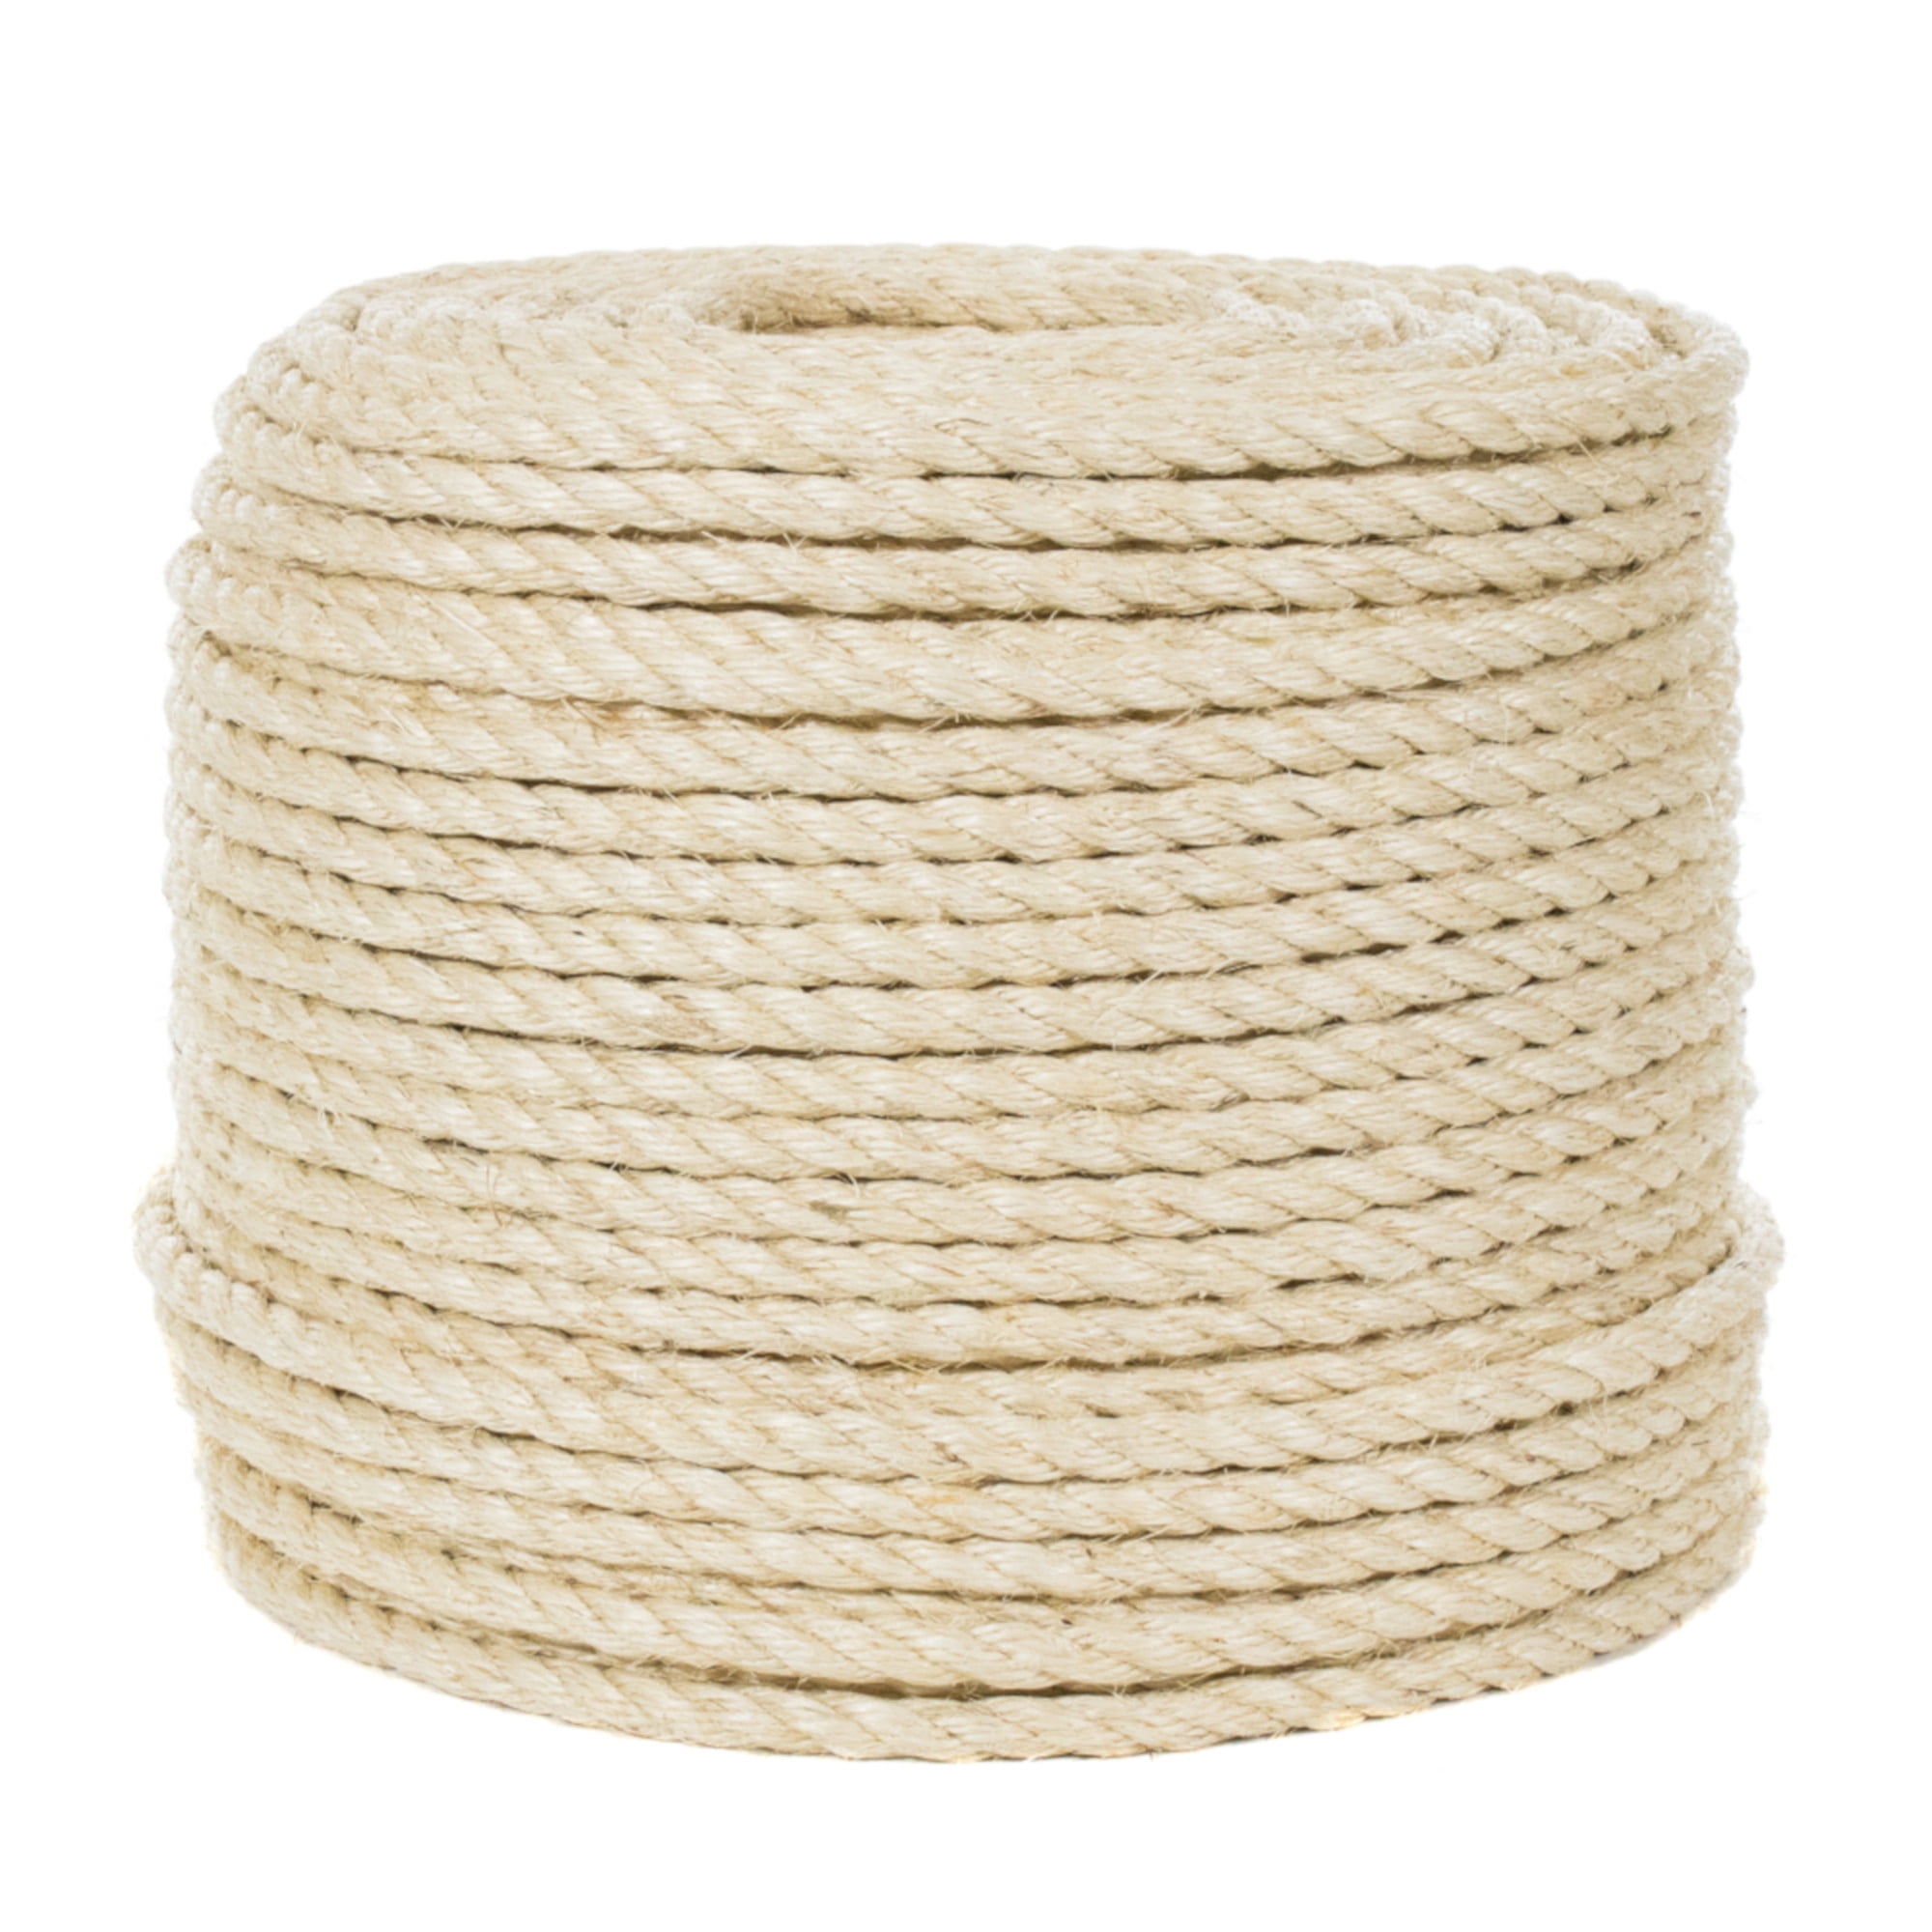 x 50 ft Twisted Sisal Rope Natural Fibers Everbilt 3/8 in 